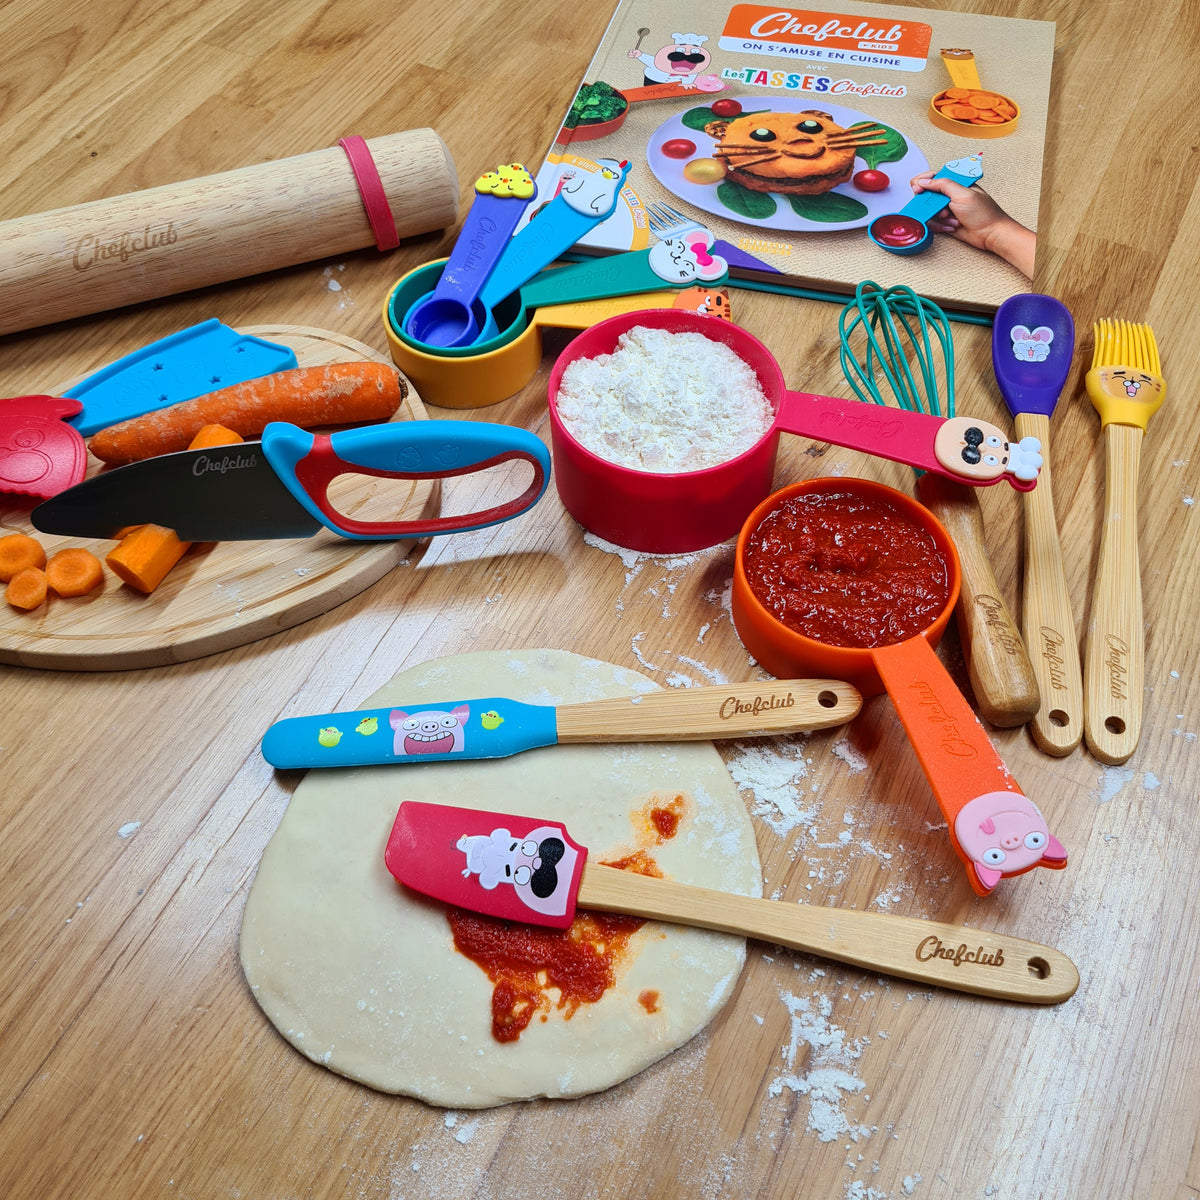 The Chefclub Kids Cooking Utensils